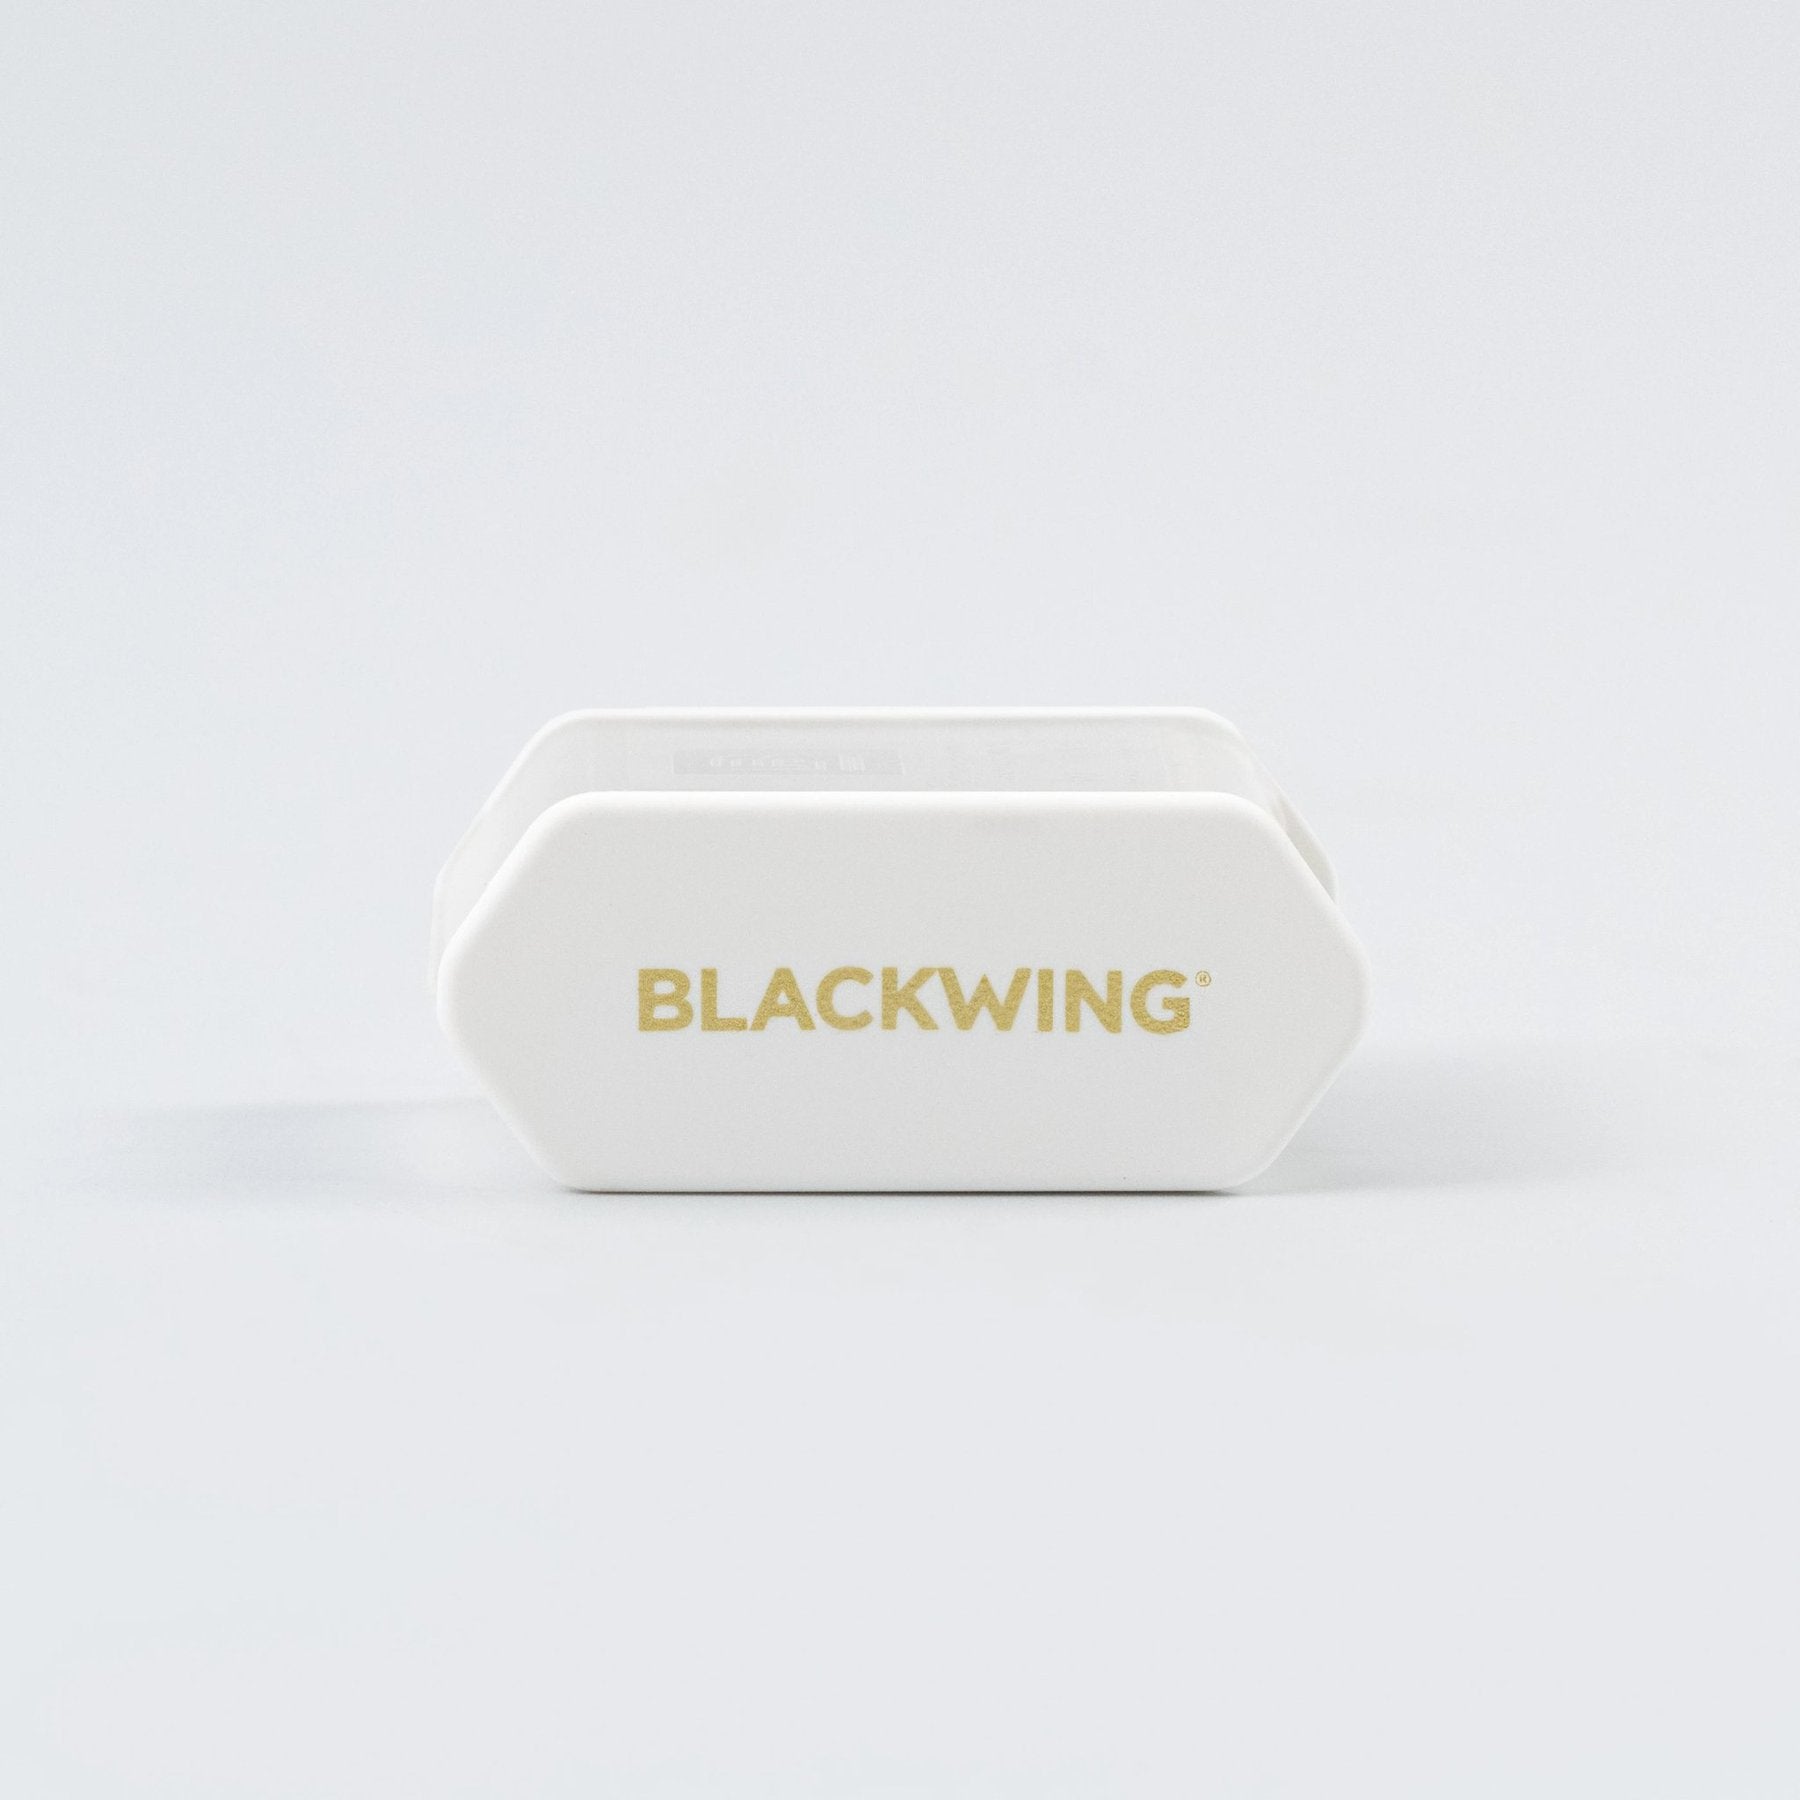 Long-Point Pencil Sharpener by Blackwing (Black, Grey or White)